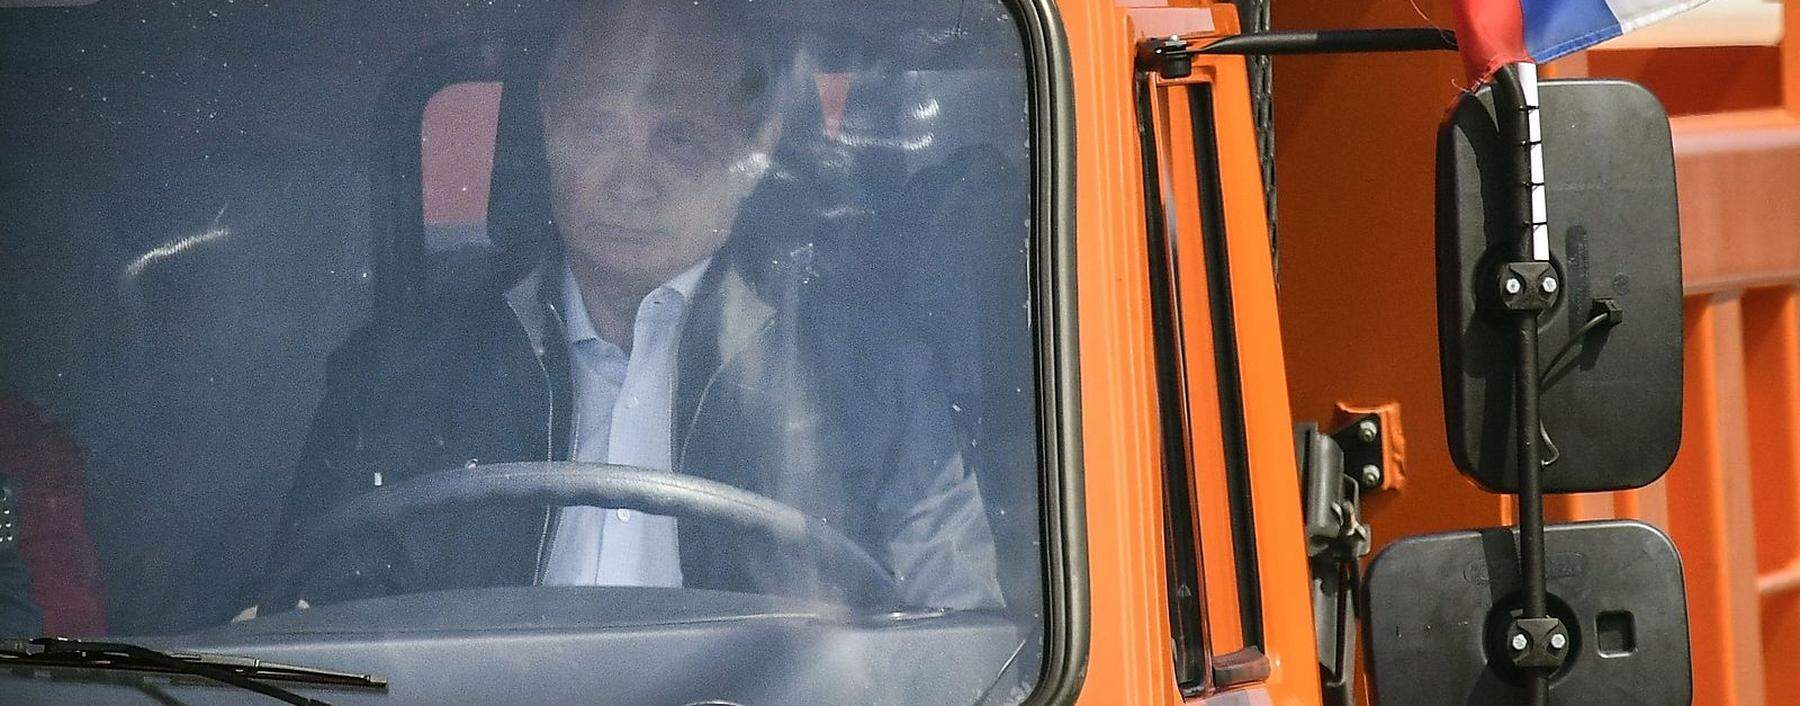 Russian President Putin drives a Kamaz truck during a ceremony opening a bridge, which was constructed to connect the Russian mainland with the Crimean Peninsula across the Kerch Strait